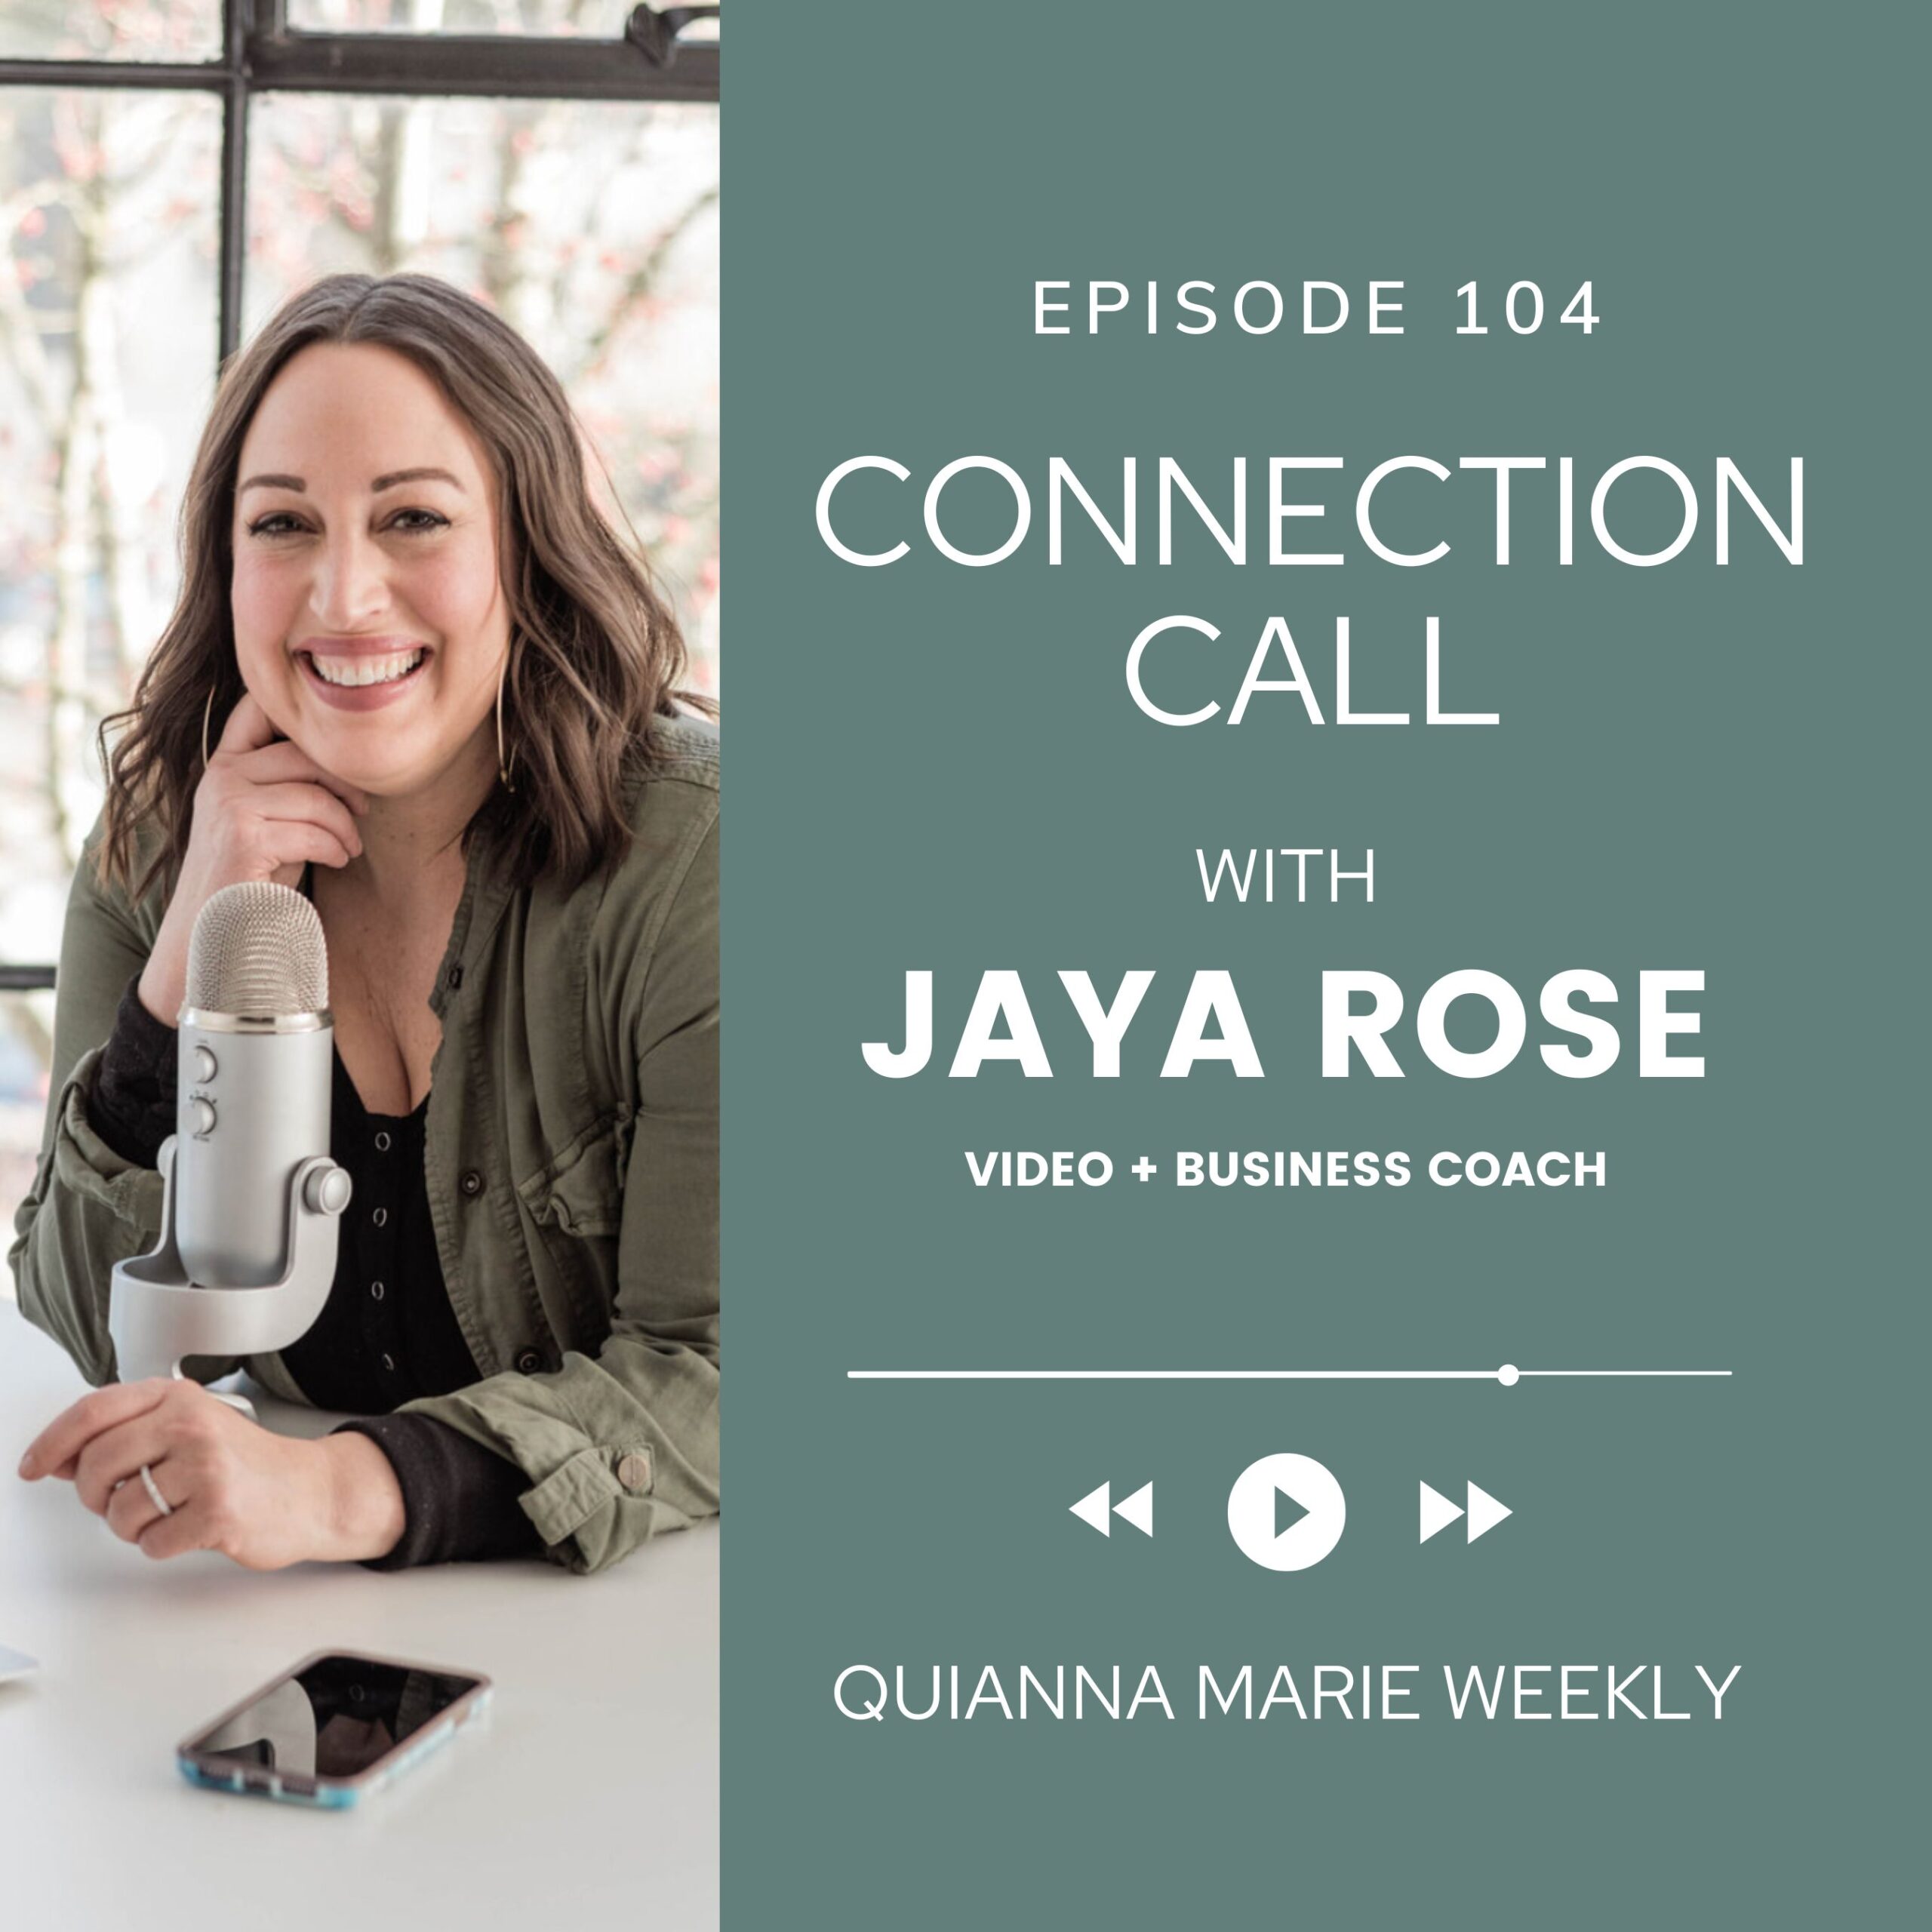 Video and Business Coach Jaya Rose - Connection Call with Quianna Marie